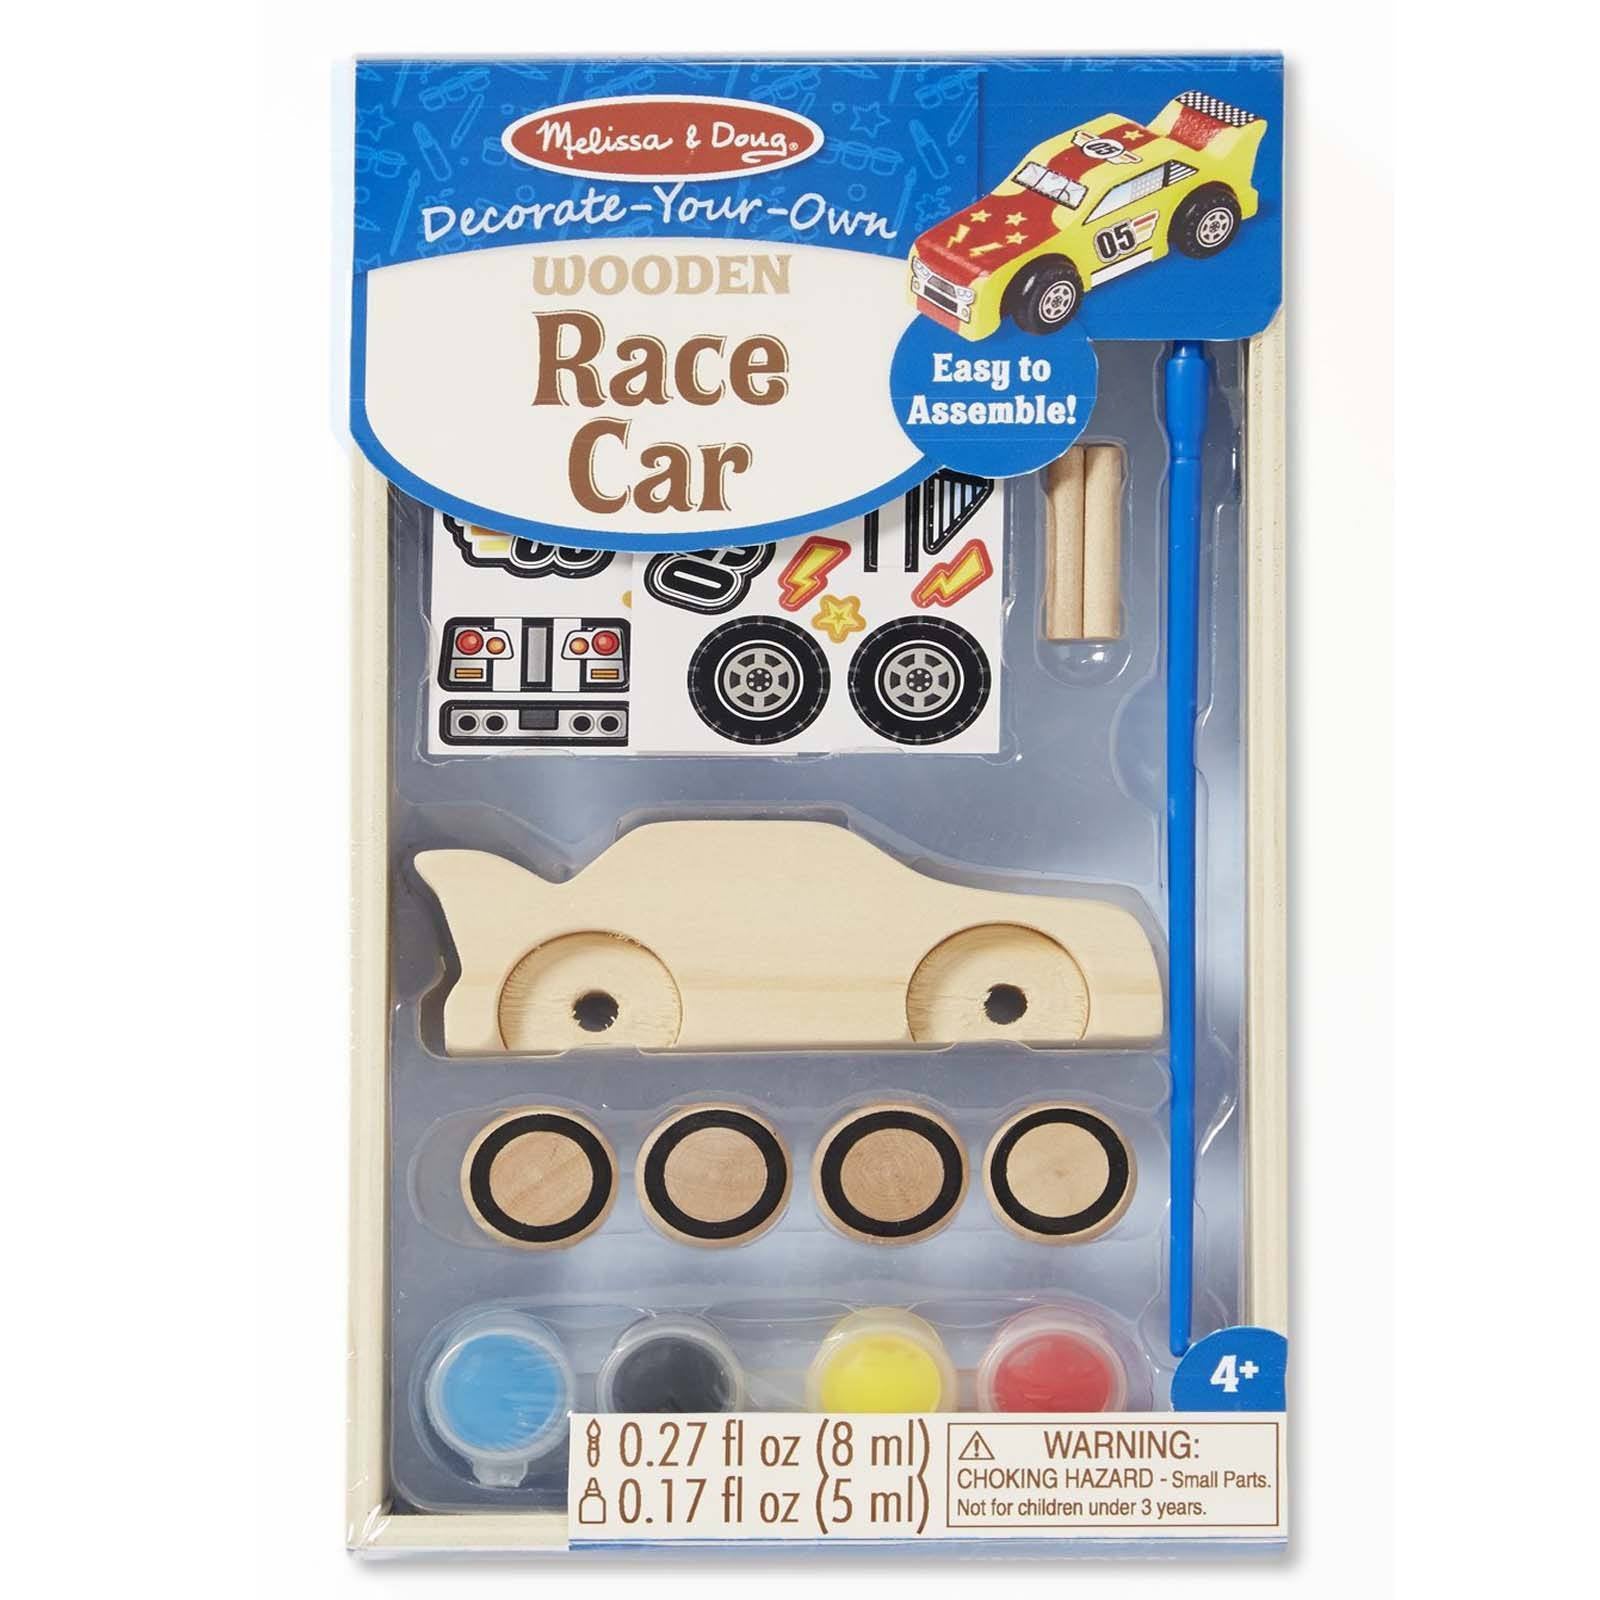 Melissa & Doug Created by Me! Wooden Craft Kit, Race Car